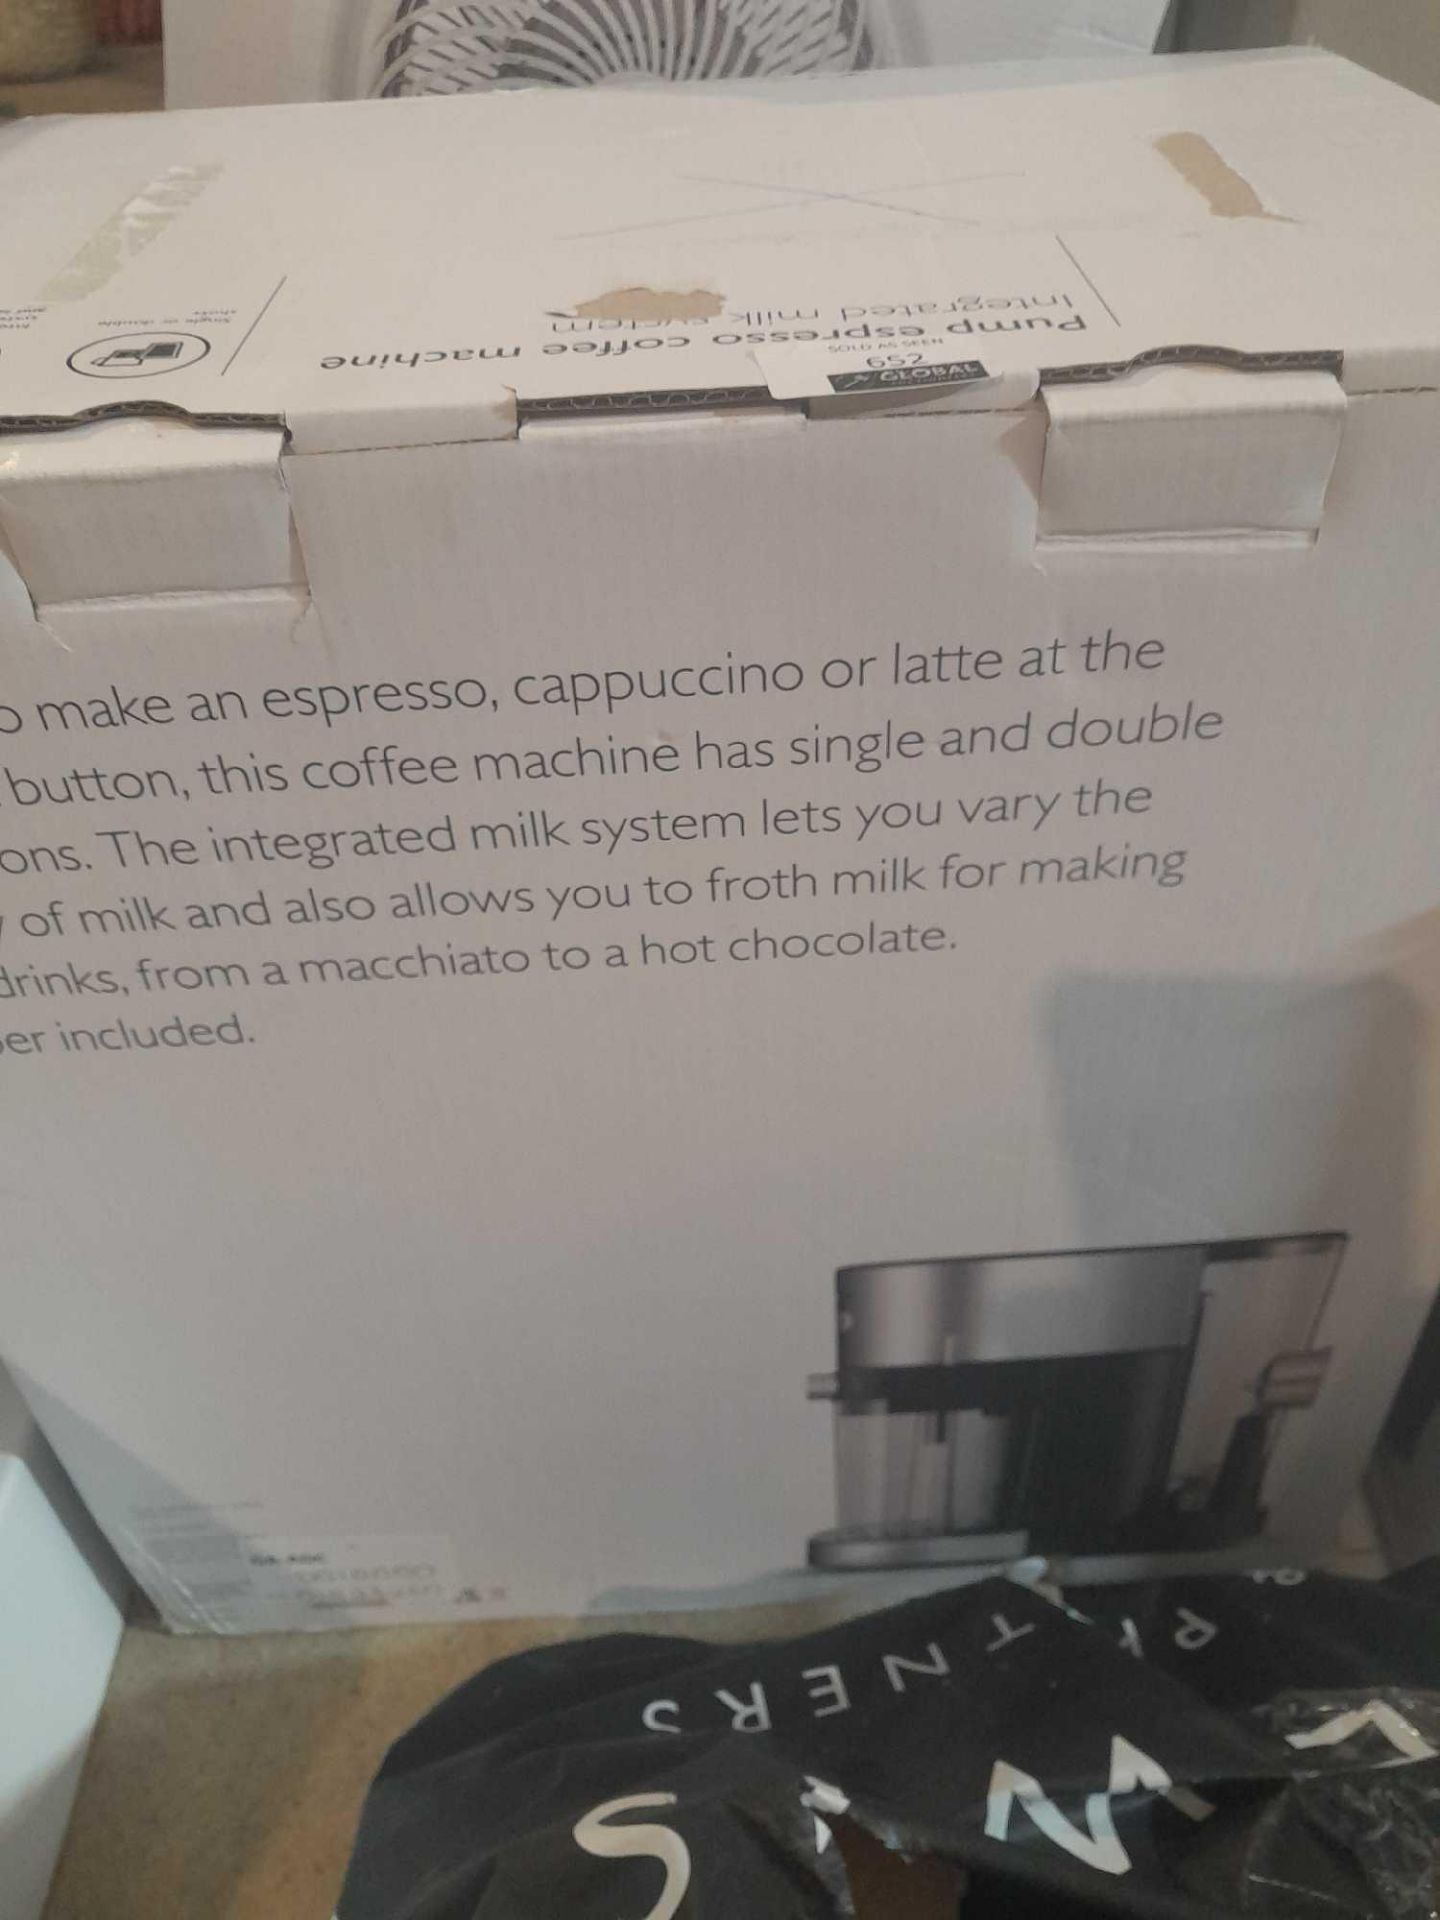 RRP £100 Boxed John Lewis Pump Espresso Coffee Machine With Integrated Milk System - Image 2 of 2